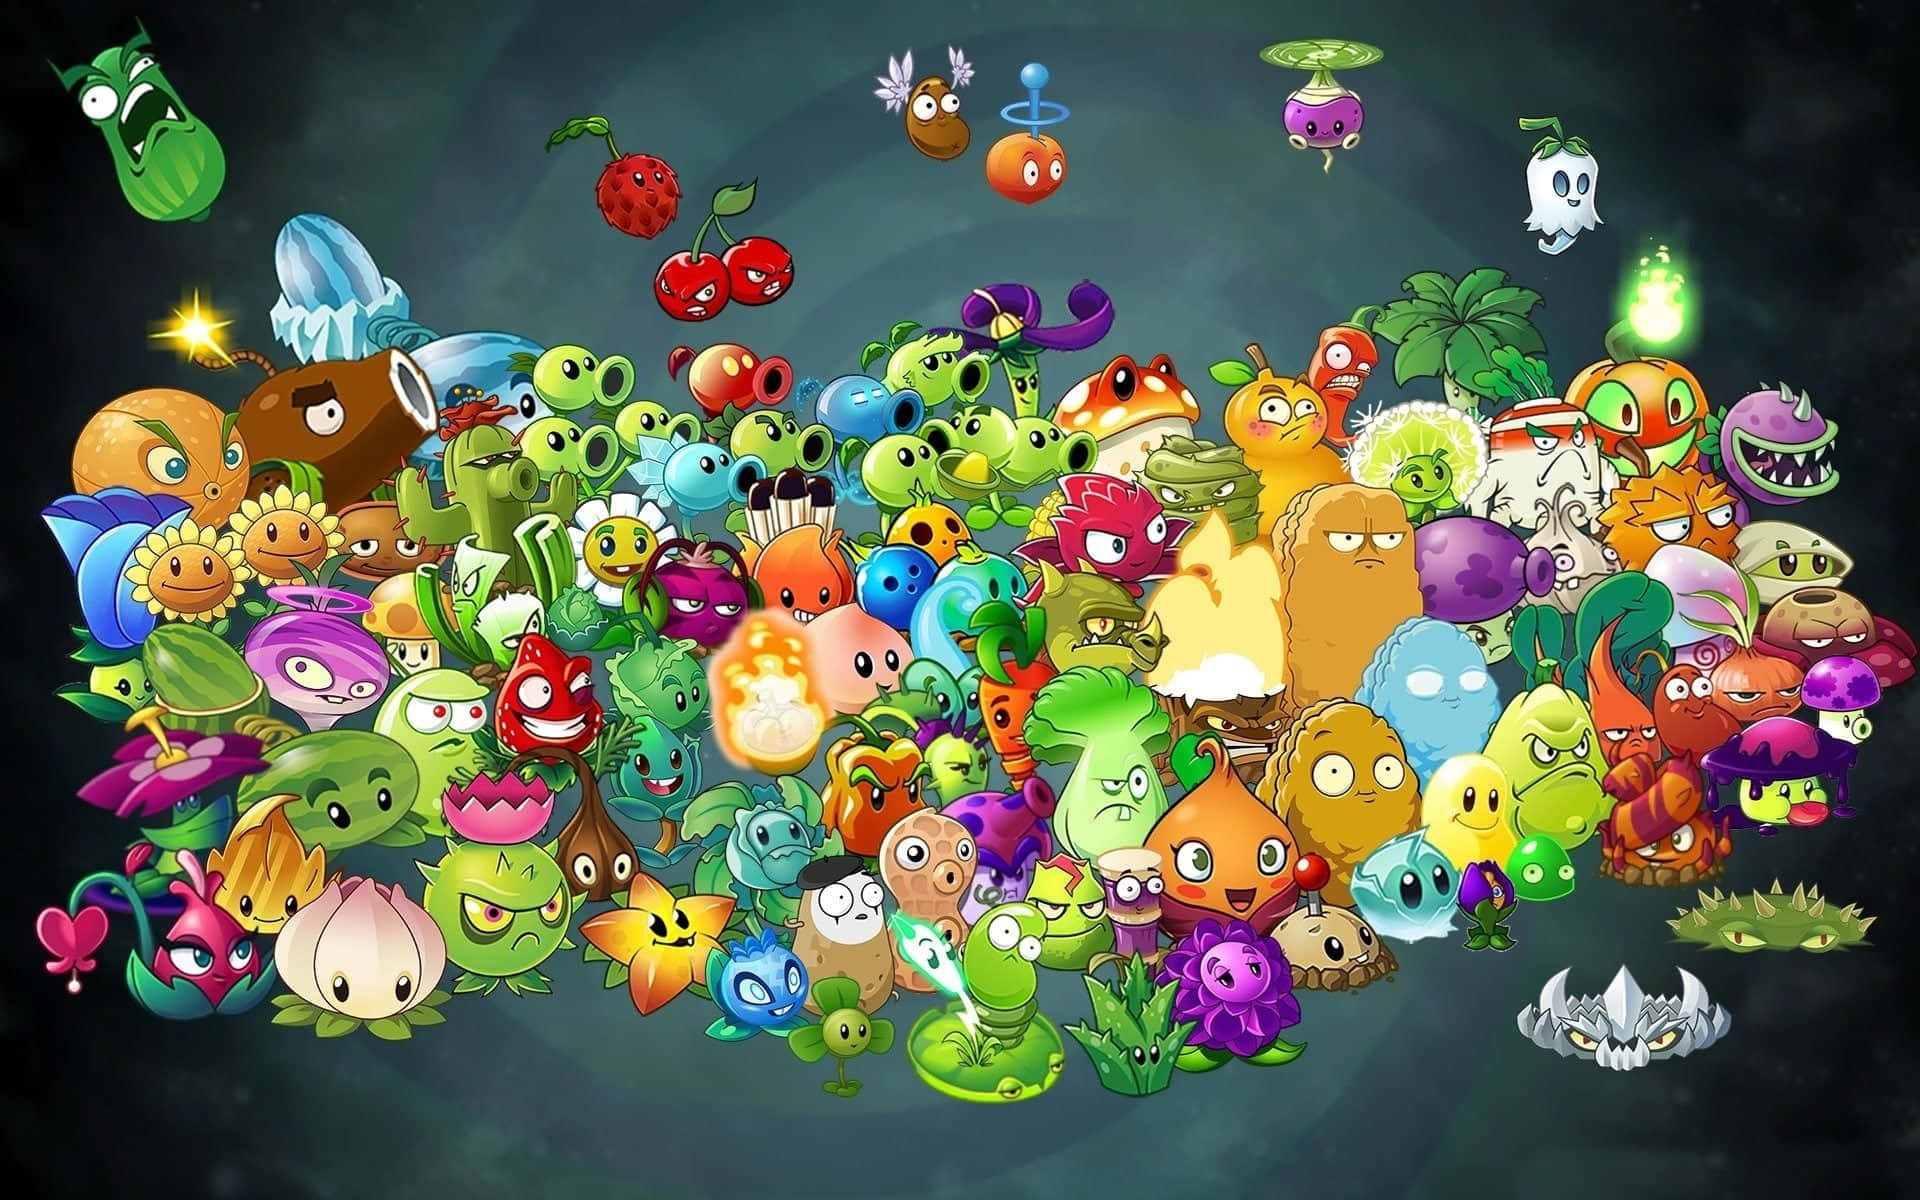 PVZ Wallpaper/Templates to use for your videos or other! :  r/PvZGardenWarfare